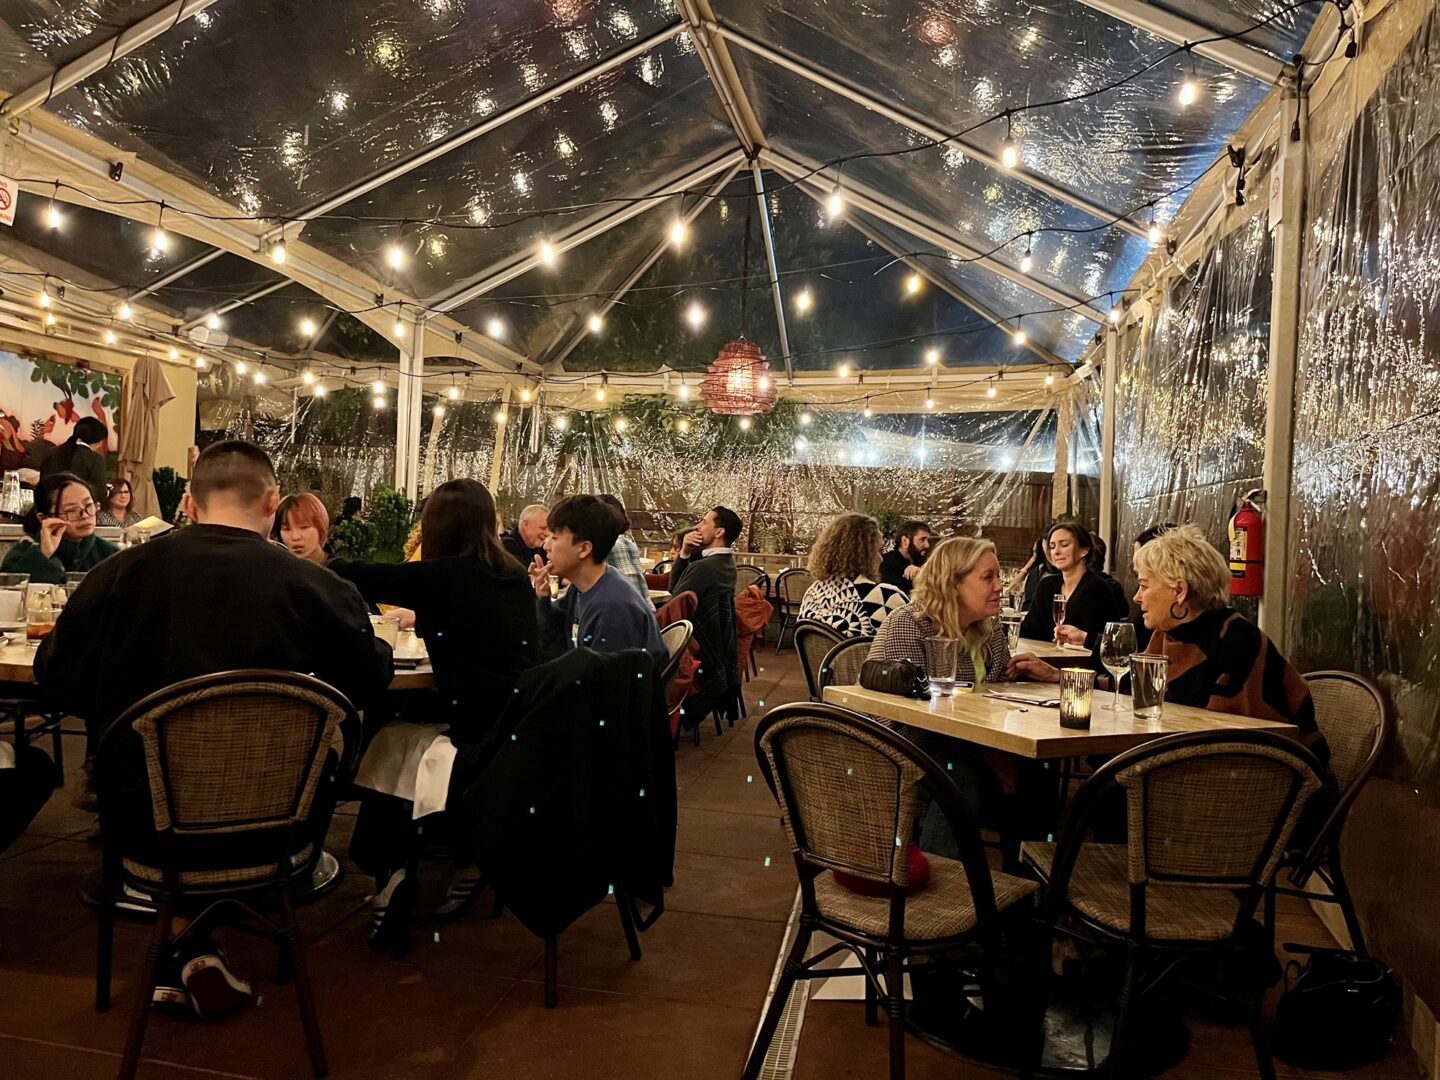 A group of people sitting at tables under lights.patio tent 2023 (7)